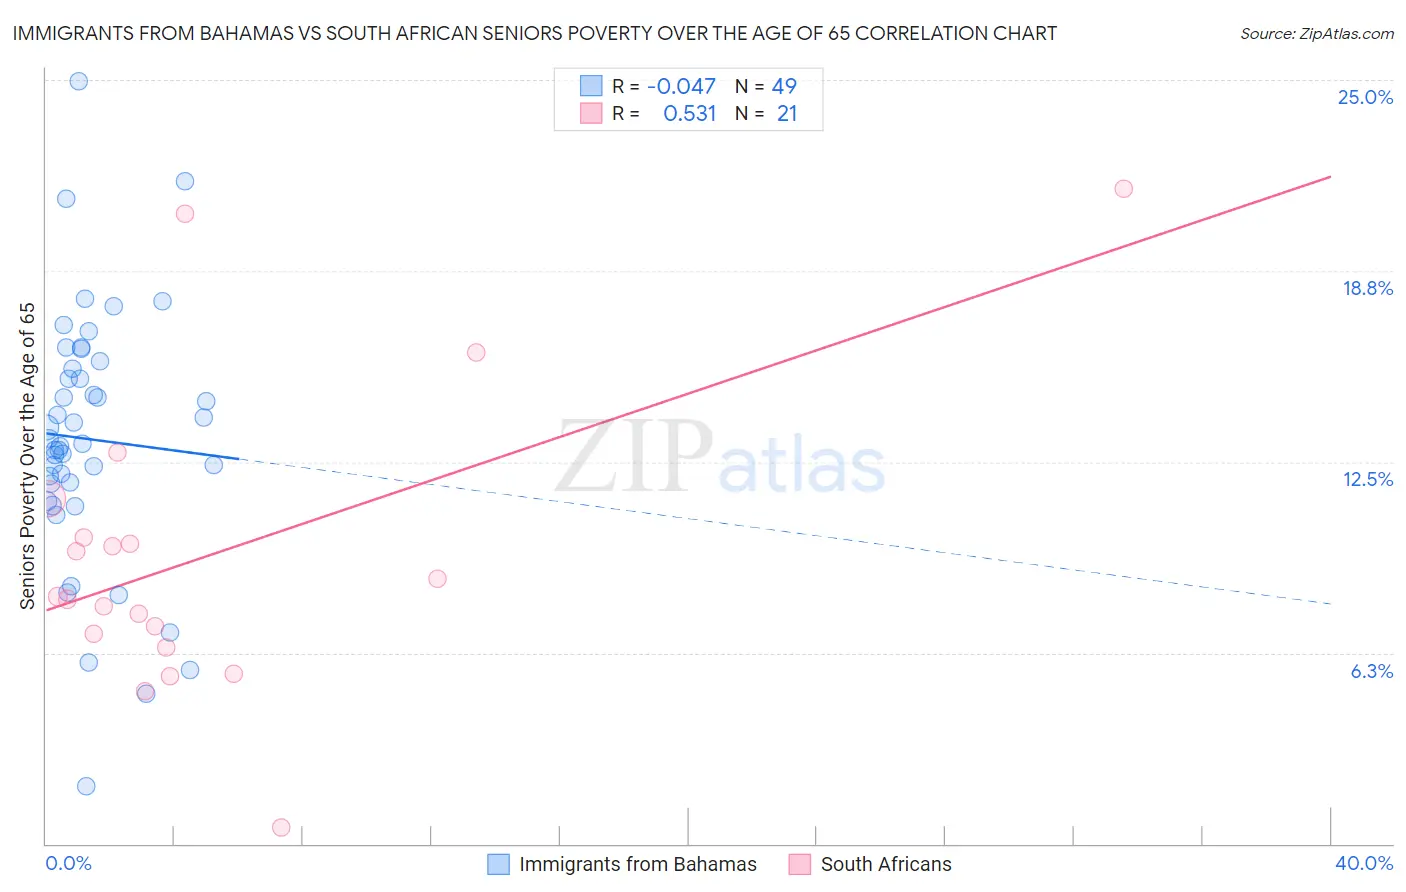 Immigrants from Bahamas vs South African Seniors Poverty Over the Age of 65